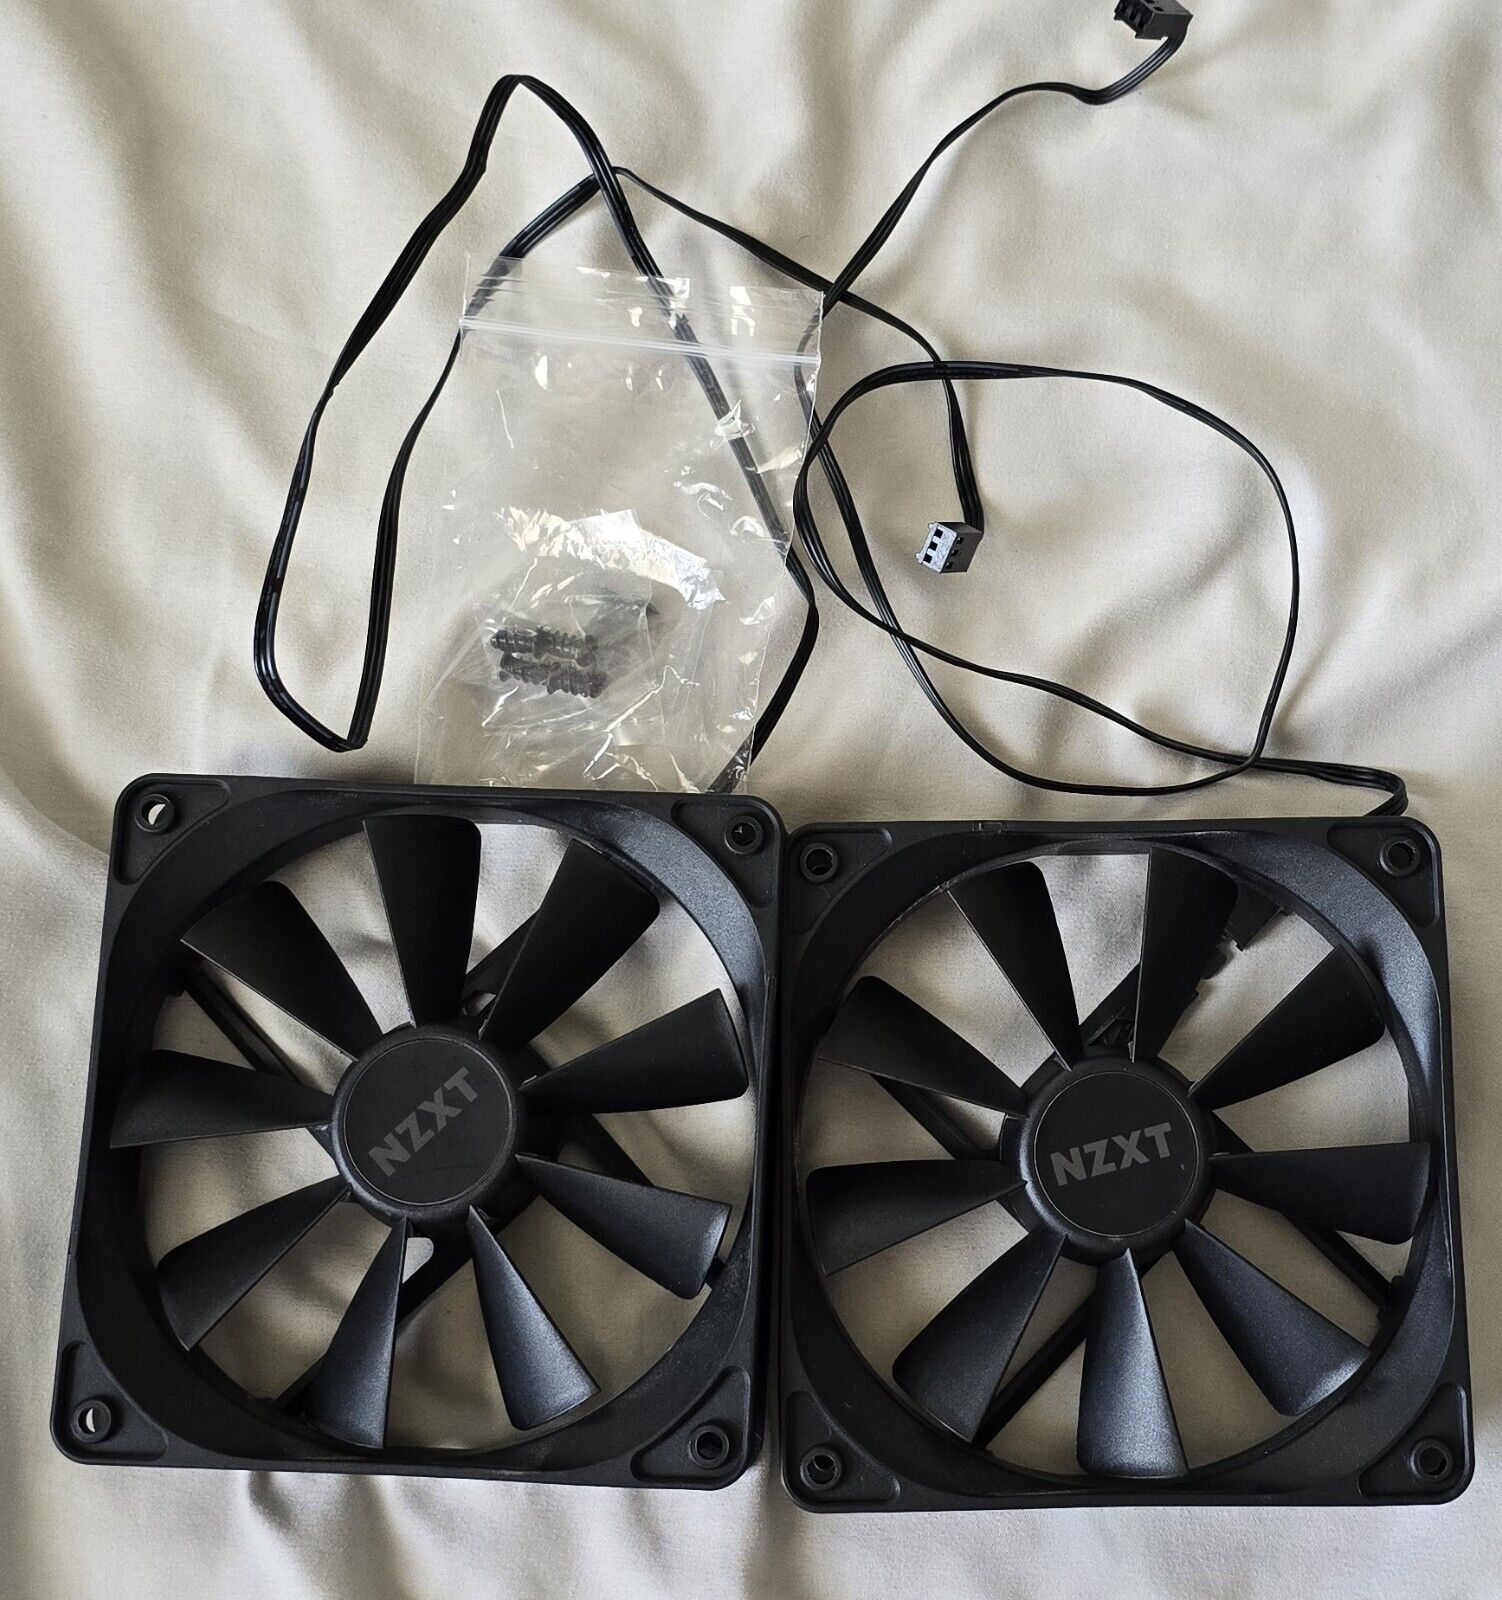 NZXT Case Fan Lot of 2 Rifle Bearing RF-AF12C-RB 12VDC 0.16A 4-Pin 120mm